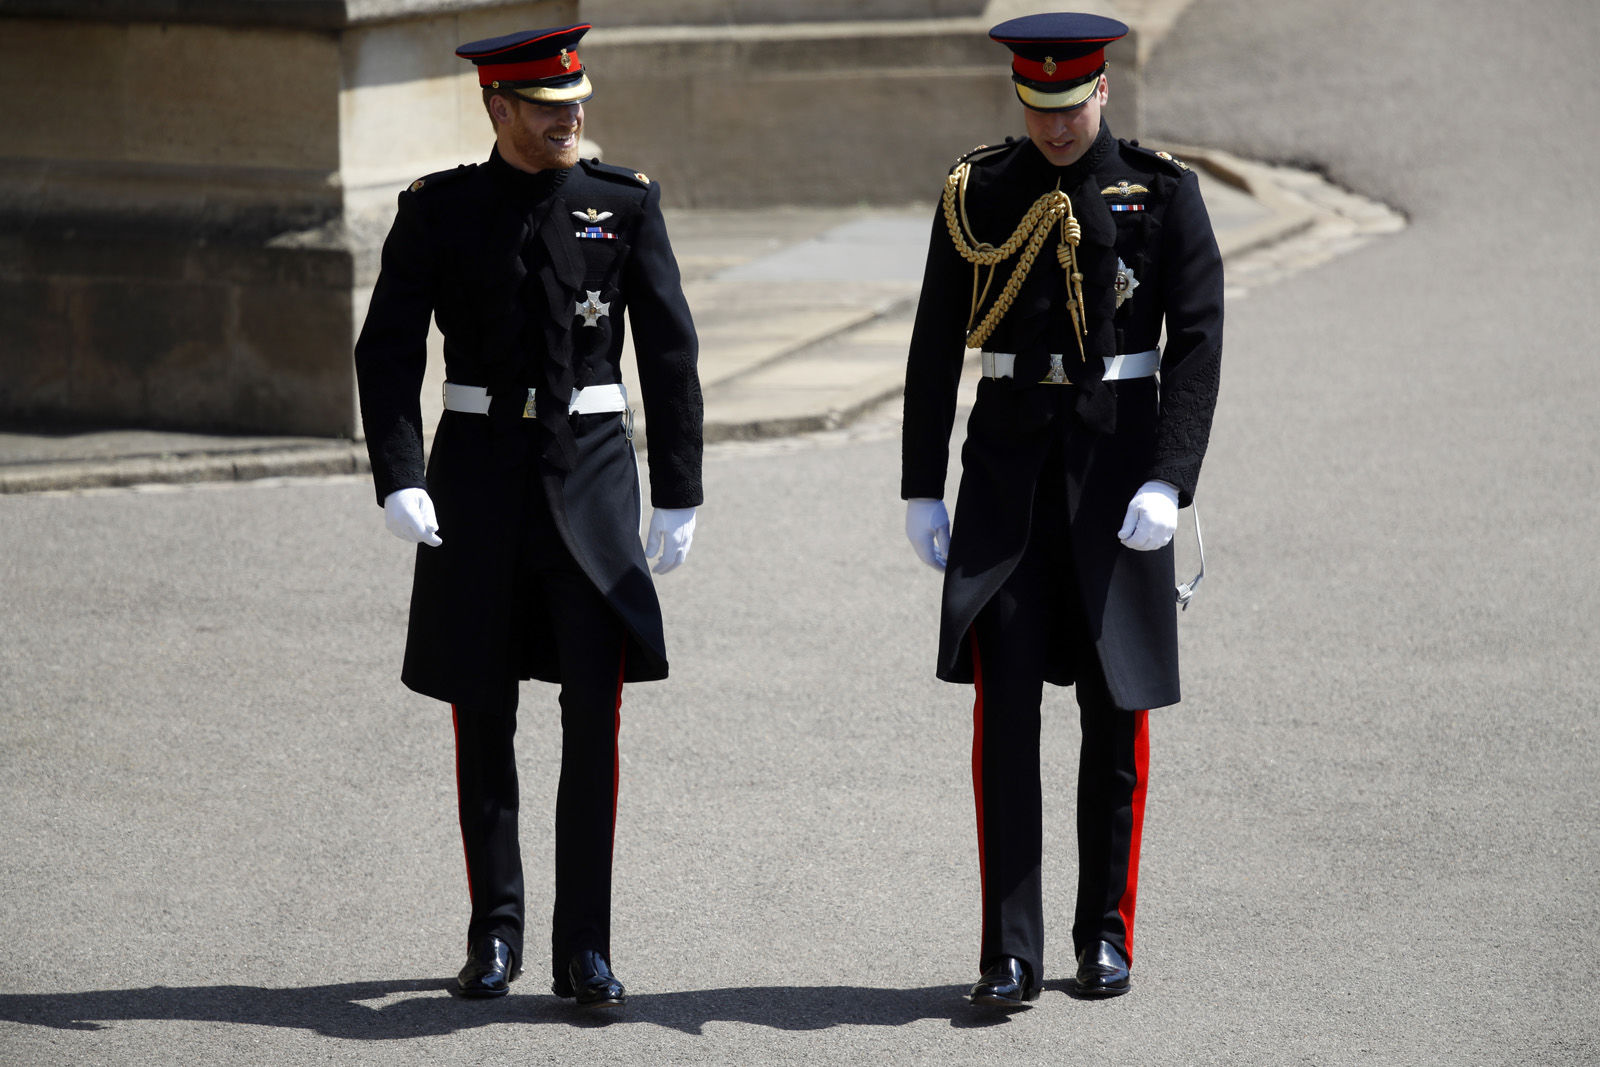 Britain's Prince Harry, left, and best man Prince William arrive for the wedding ceremony at St. George's Chapel in Windsor Castle in Windsor, near London, England, Saturday, May 19, 2018. (Odd Anderson/pool photo via AP)